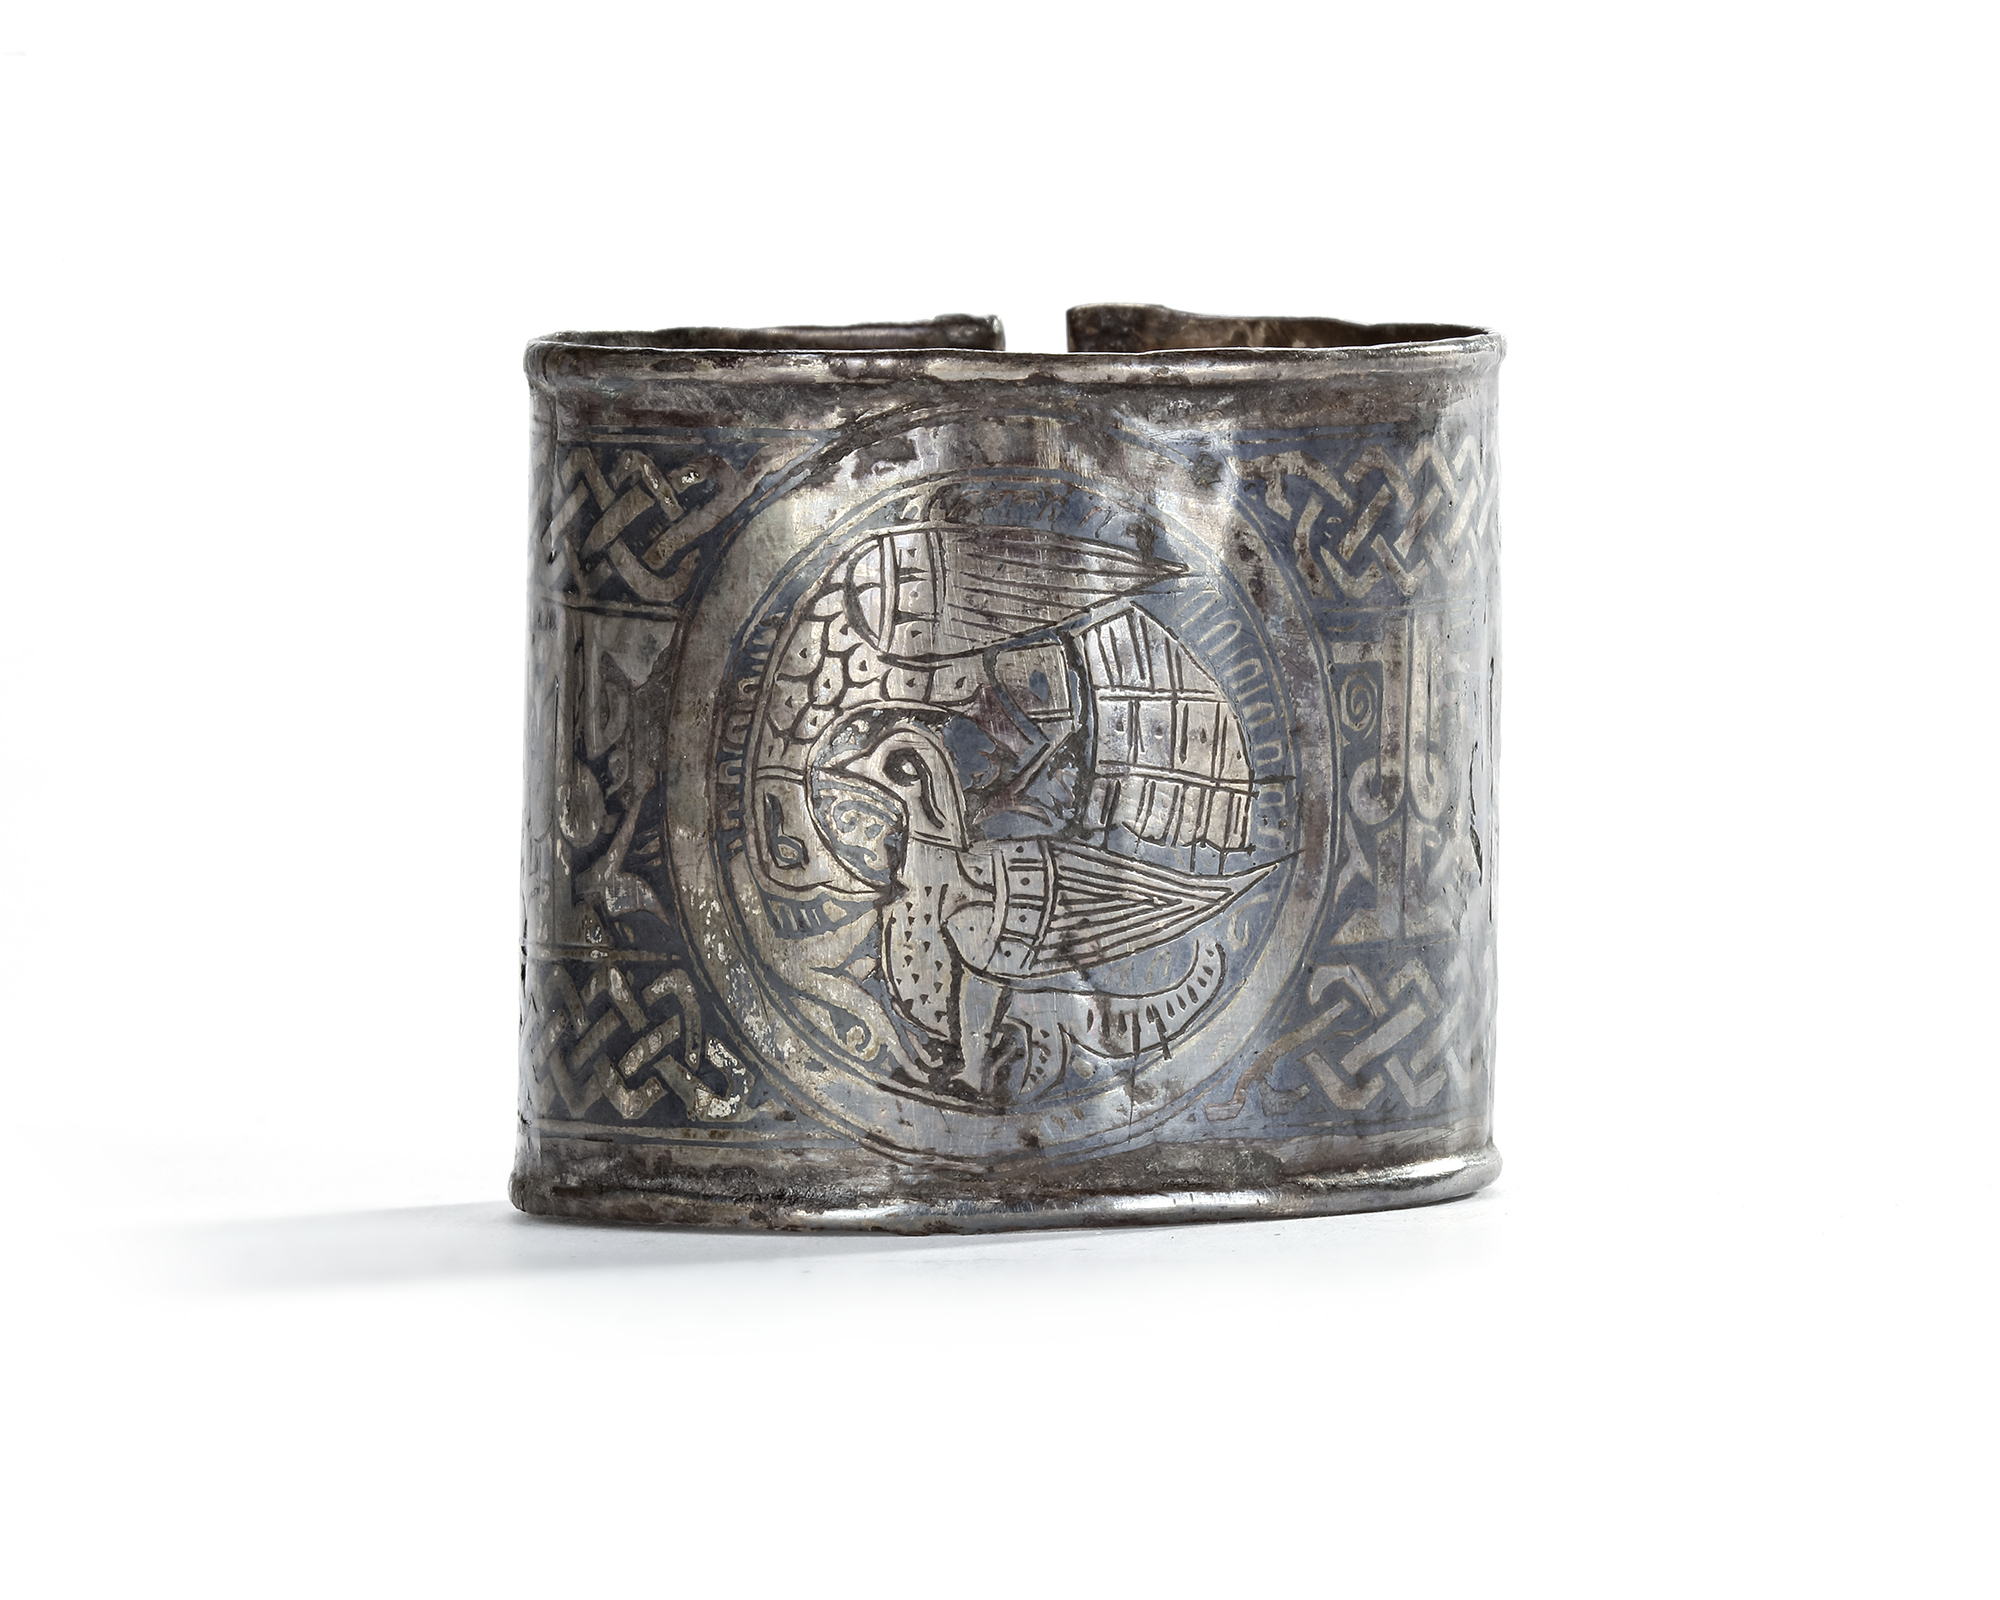 A SILVER AND NIELLO BRACELET WITH KUFIC INSCRIPTION, 11TH-12TH CENTURY - Image 2 of 6